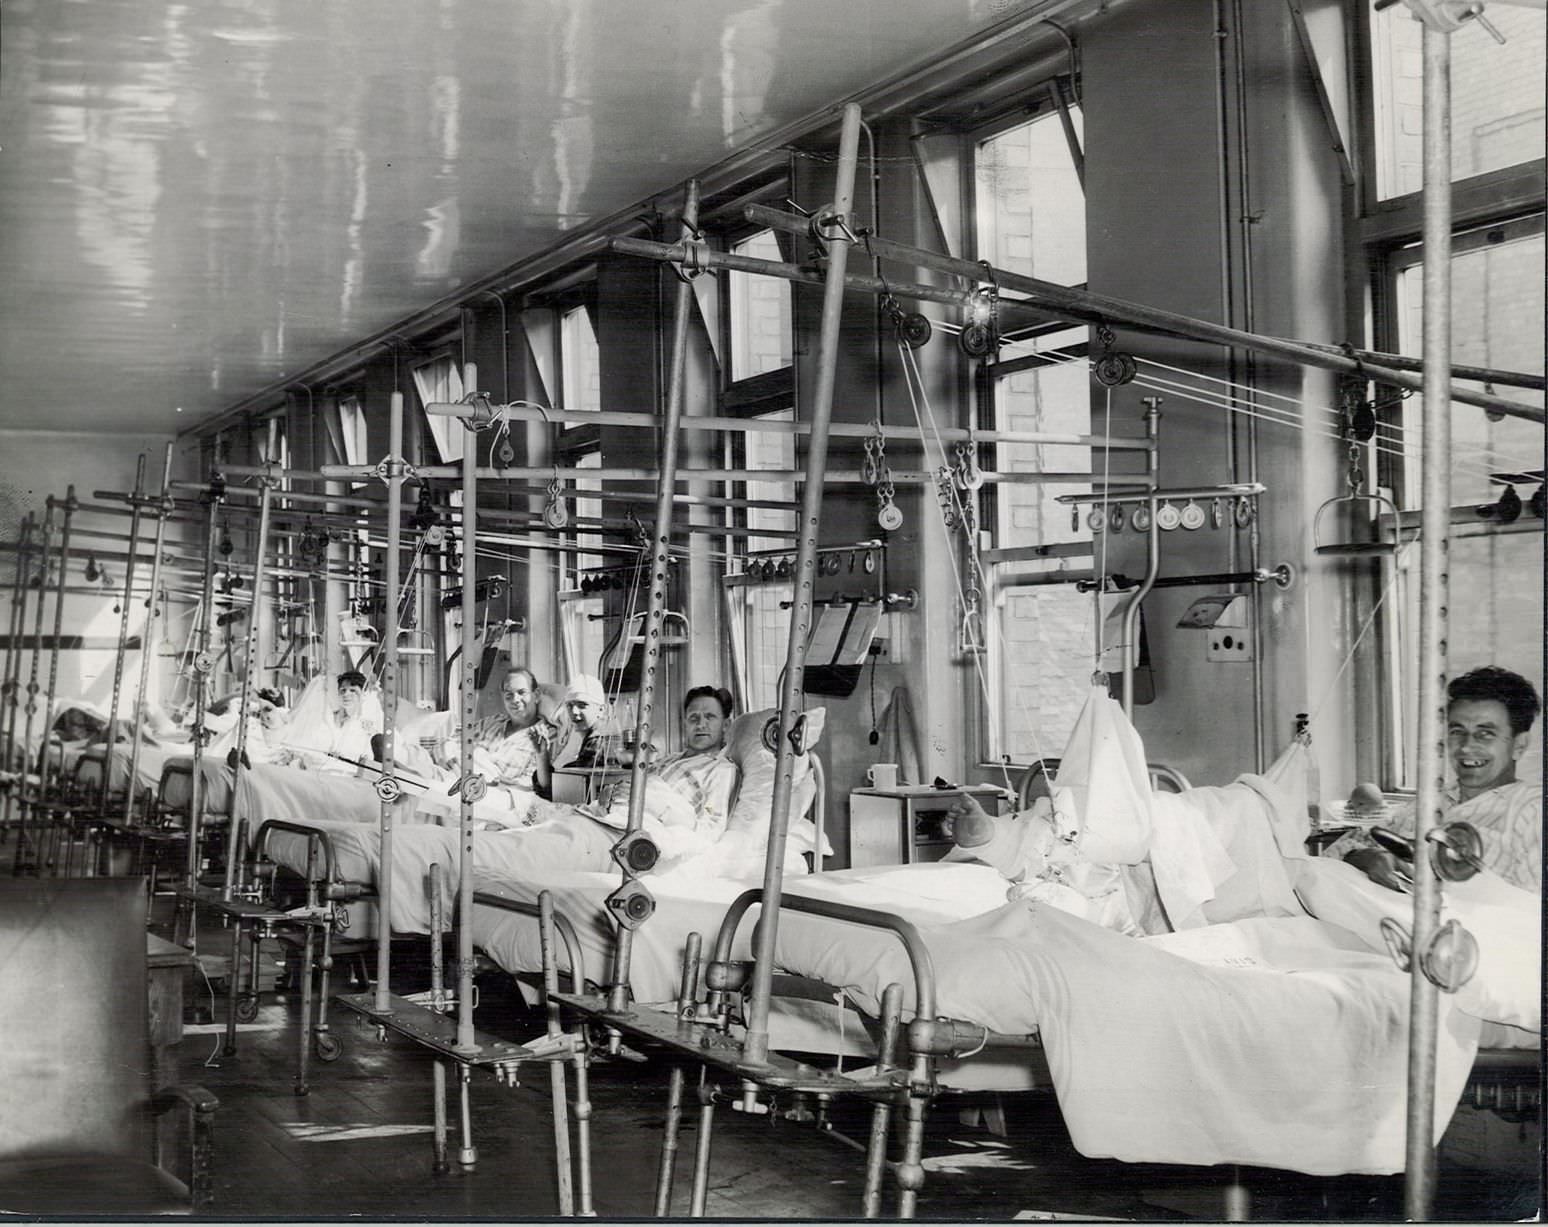 A ward at Birmingham Accident Hospital, the men in beds are all motorcycle cases, in 1960.